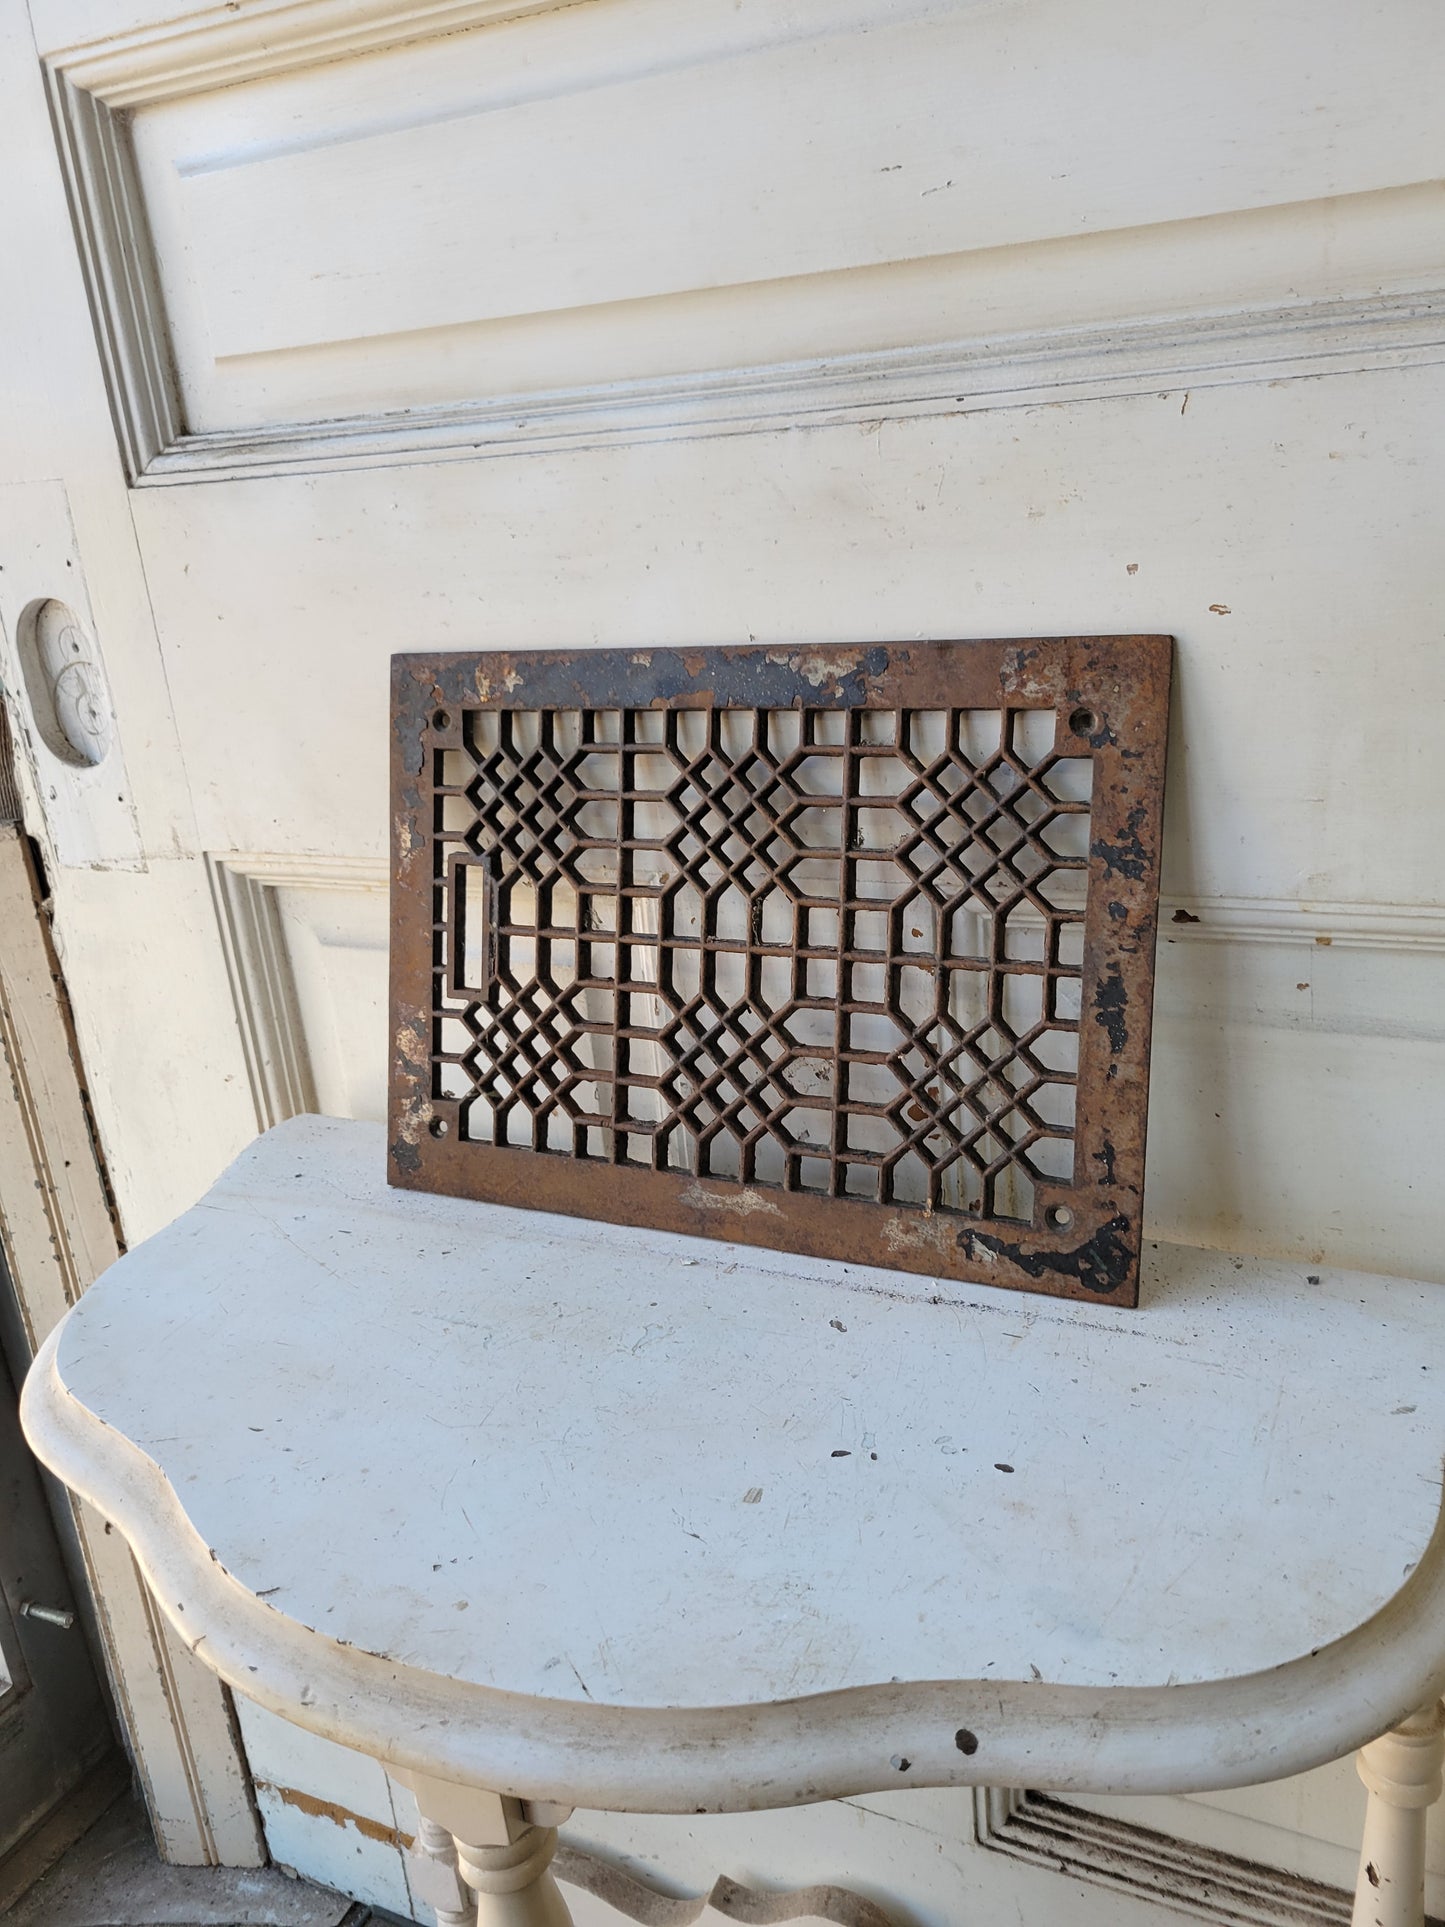 11 x 14 Antique Cast Iron Vent Cover, Floor or Wall Mount Heat Register Grate #113008